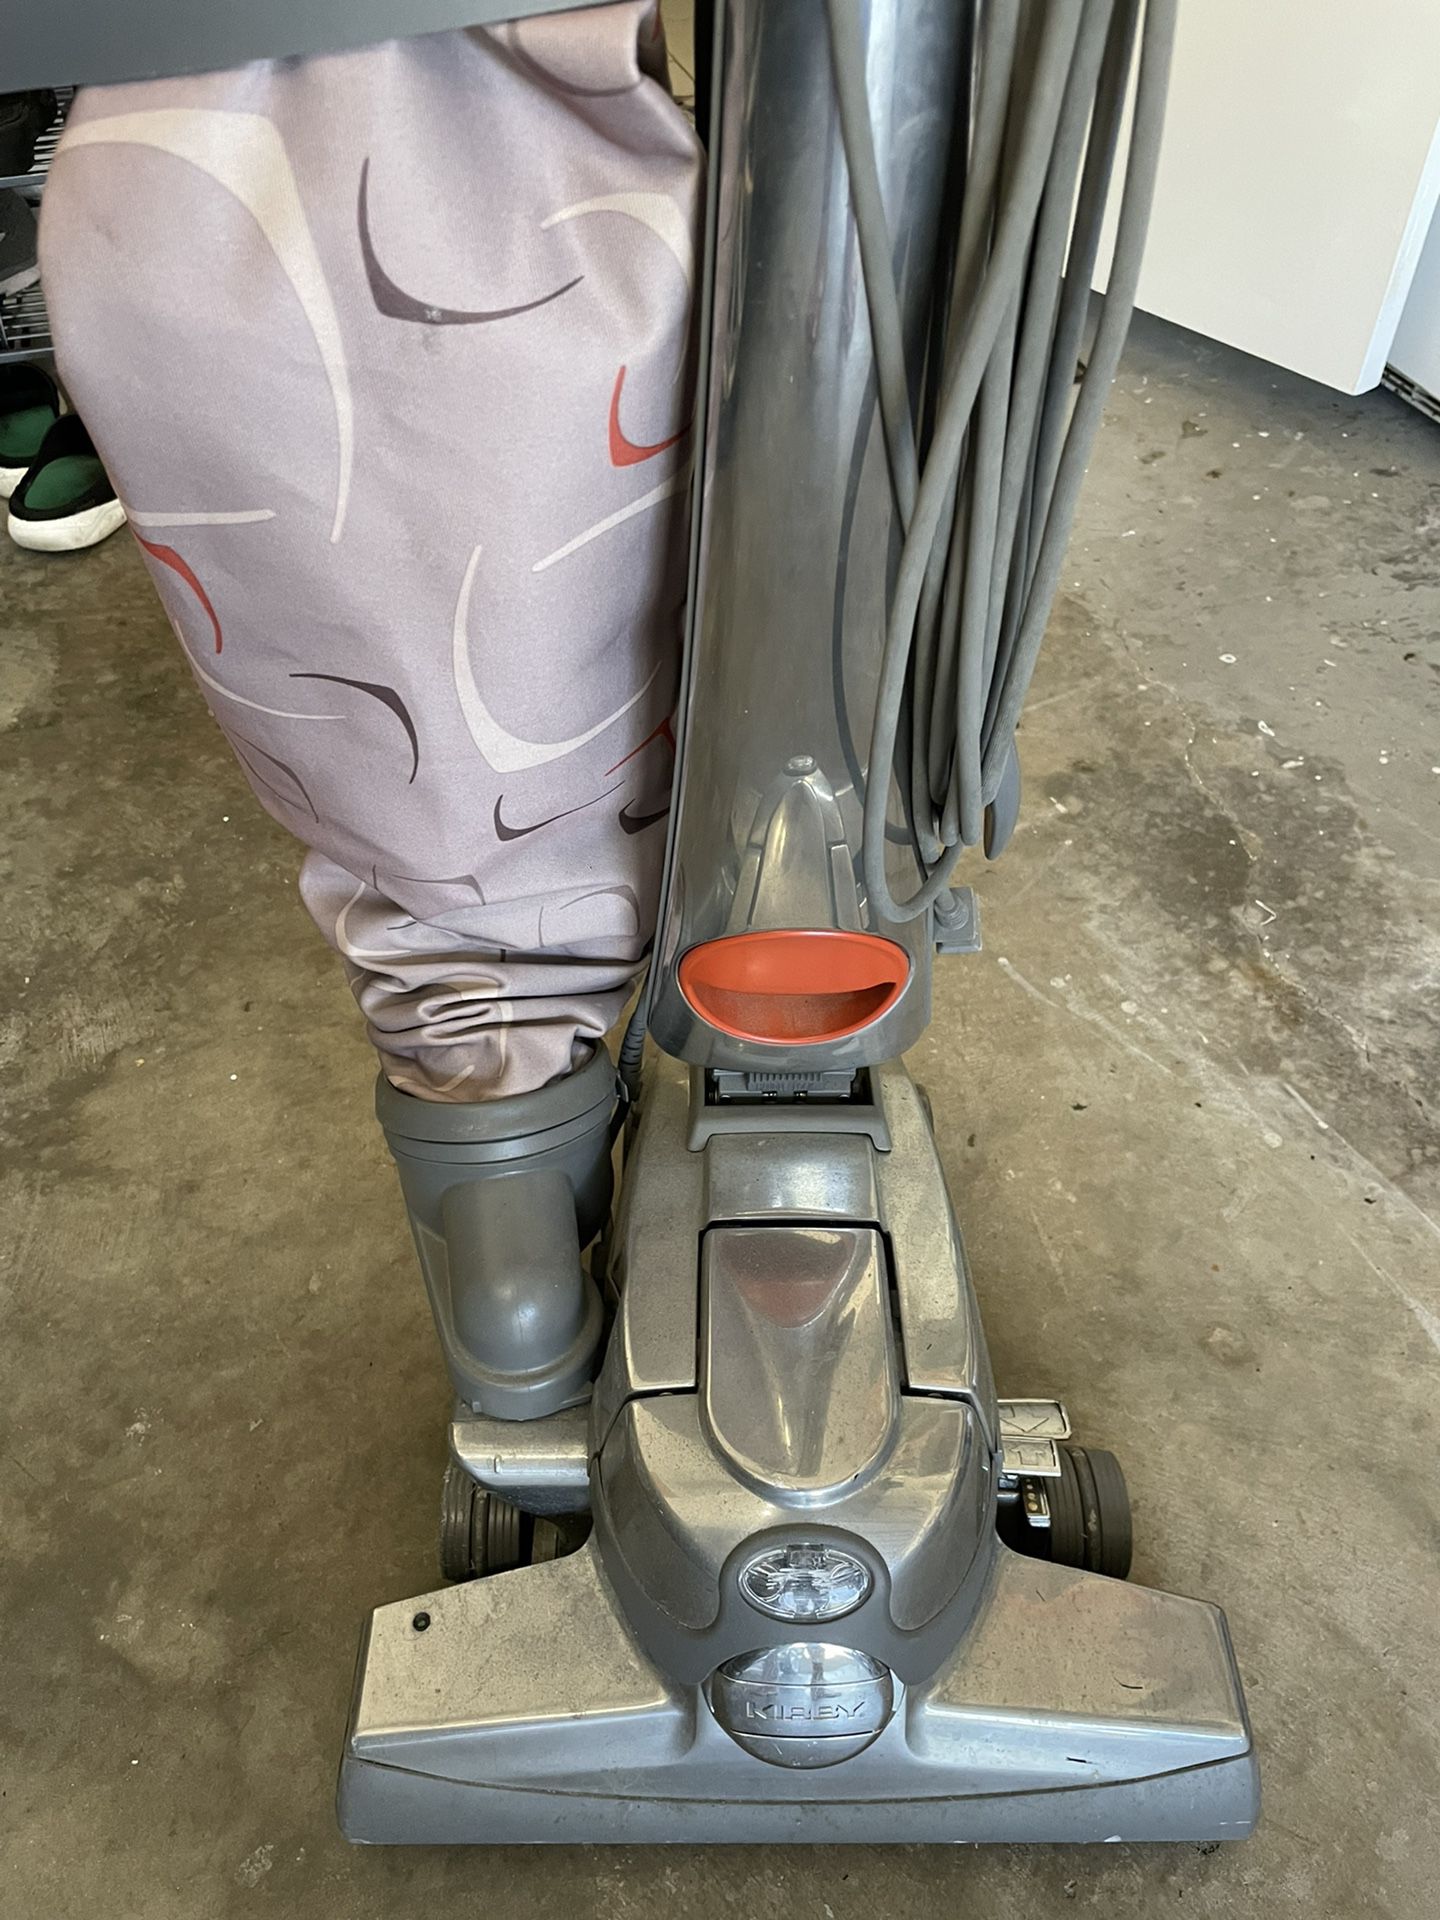 Kirby Vacuum With Shampoo attachments